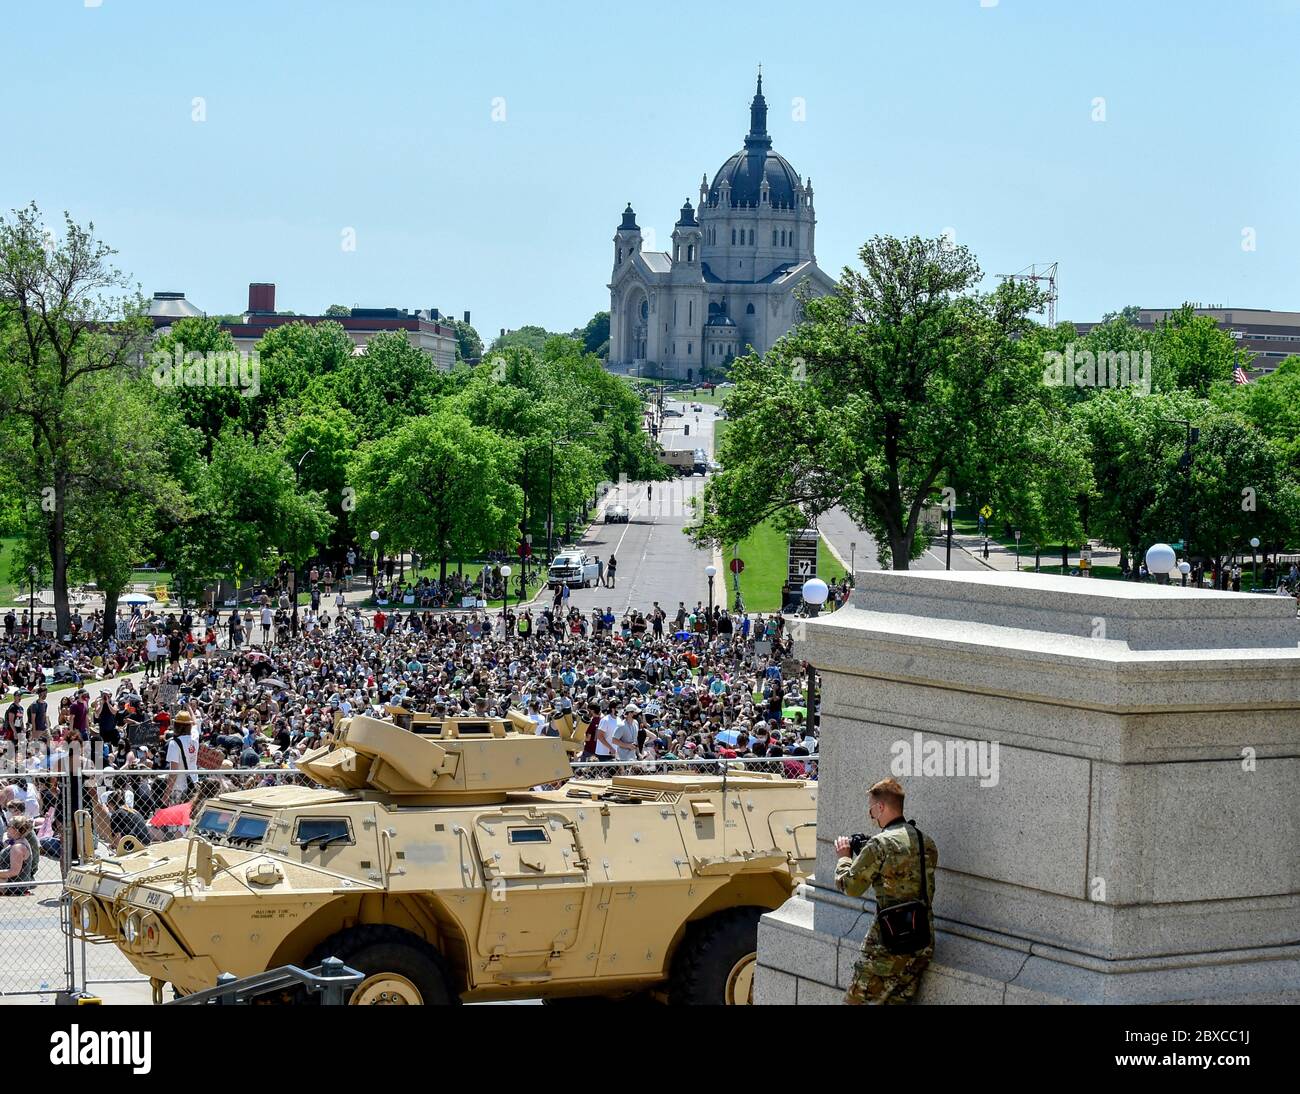 Minnesota National Guardsman stand guard outside the Minnesota State Capitol building following days of protests and riots over the death of George Floyd June 2, 2020 in Saint Paul, Minnesota. Floyd was choked to death by police in Minneapolis resulting in protests sweeping across the nation. Stock Photo